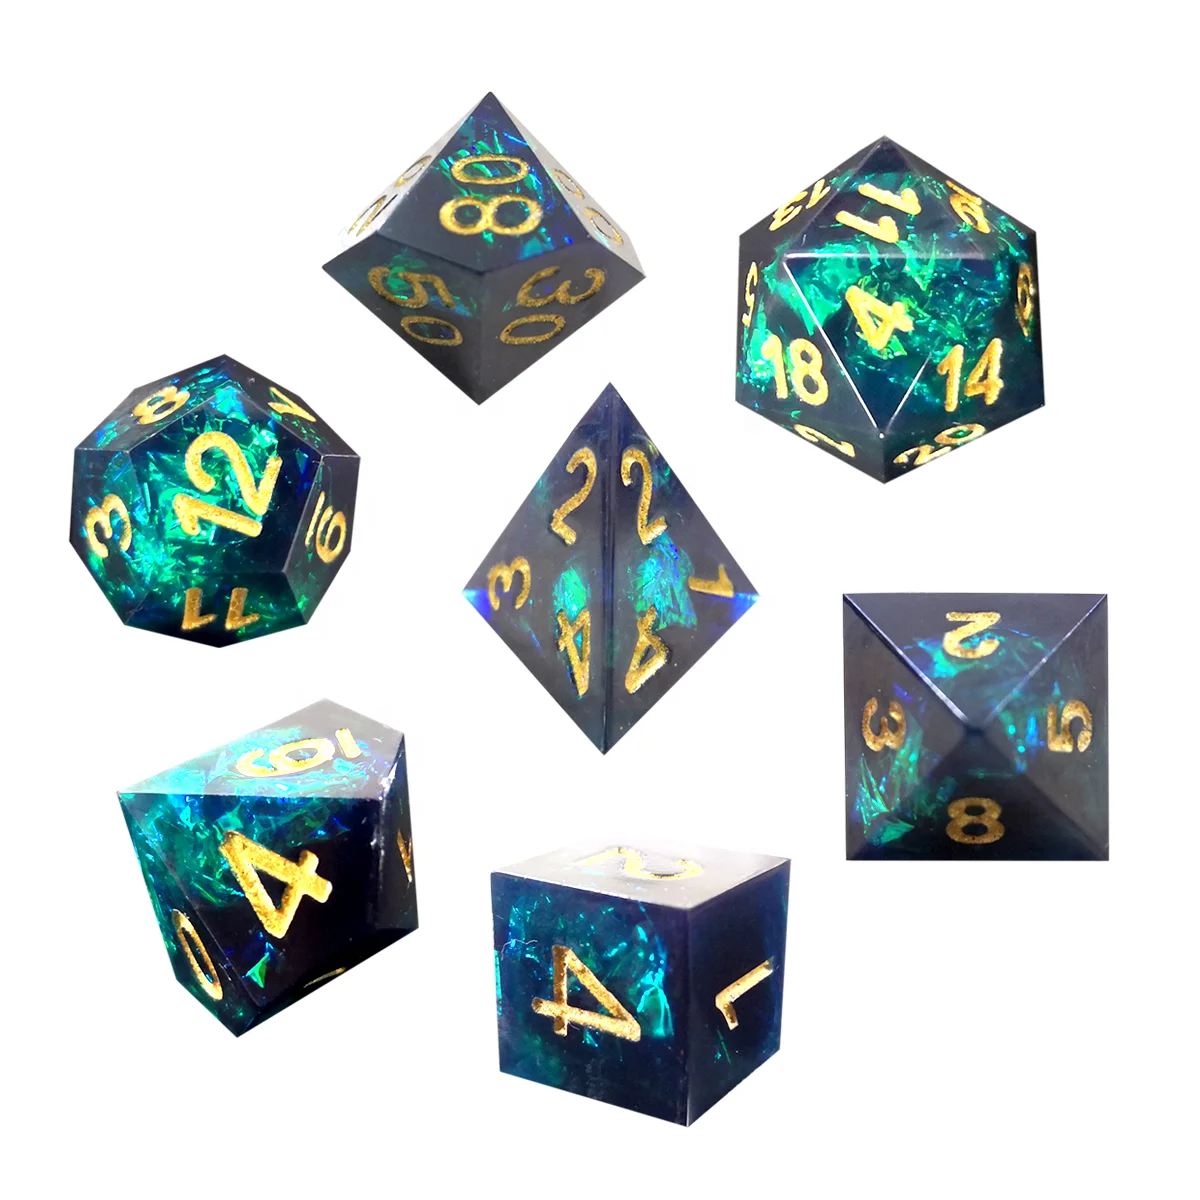 

Dnd Dice With Sparkling Black Colored Gold Number Polyhedral Gemstone Dice Set 7 Pieces For Adult Games Dungeons And Dragons D&D